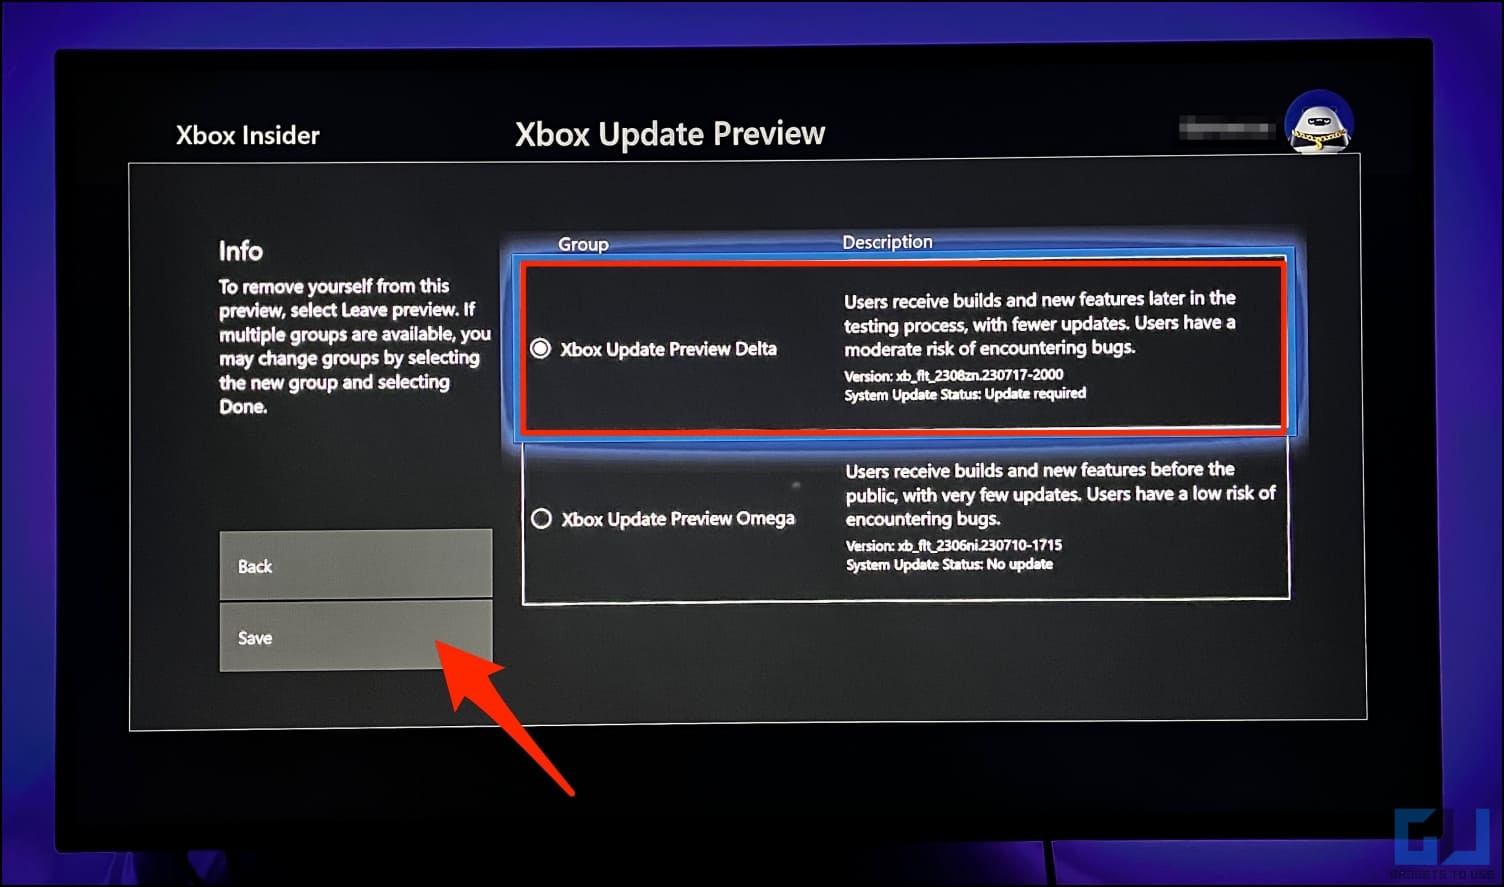 Enrol into Xbox Update Preview Delta Omega